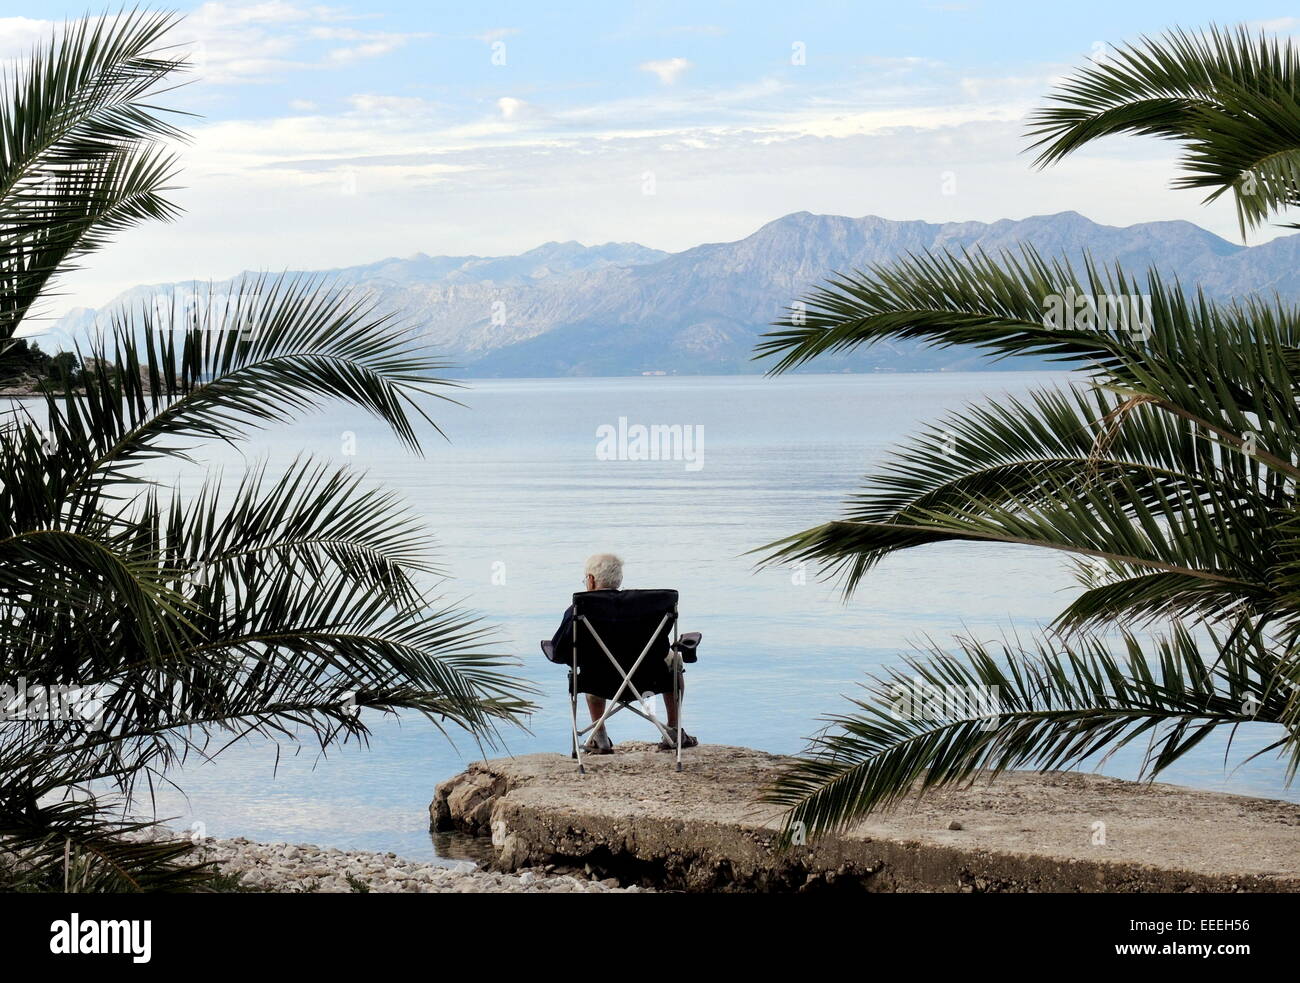 A pensioner sitting in a folding chair on the coast of the dalmatian island of Korcula (Croatia) enjoys the view to peninsula Peljesac, sun and sea, on September, 24, 2014. Stock Photo